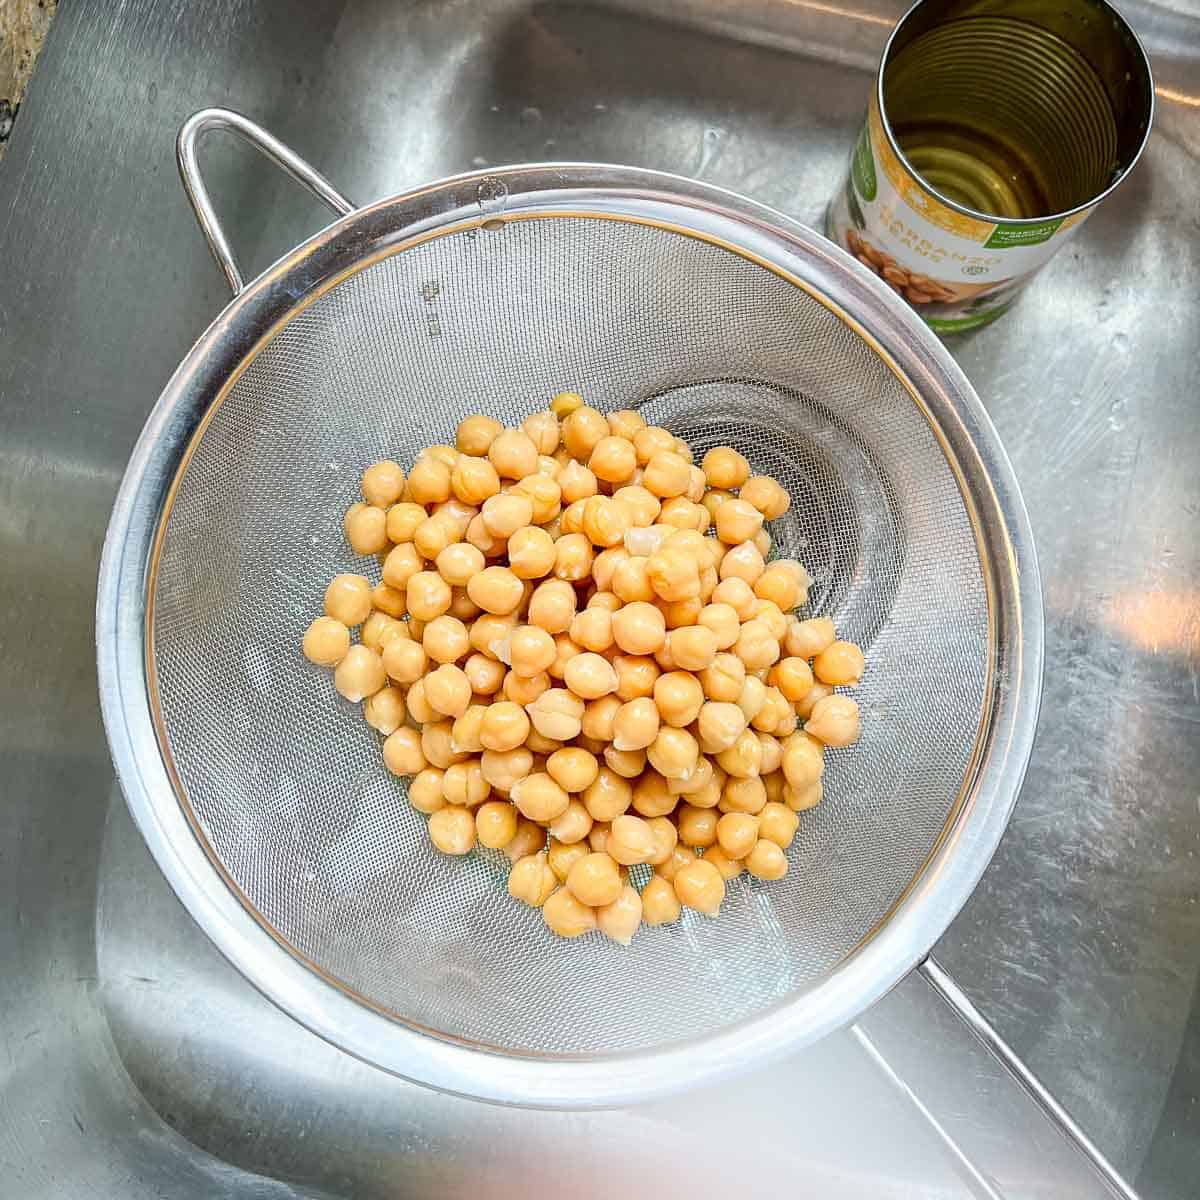 Chickpeas in a strainer over a sink.